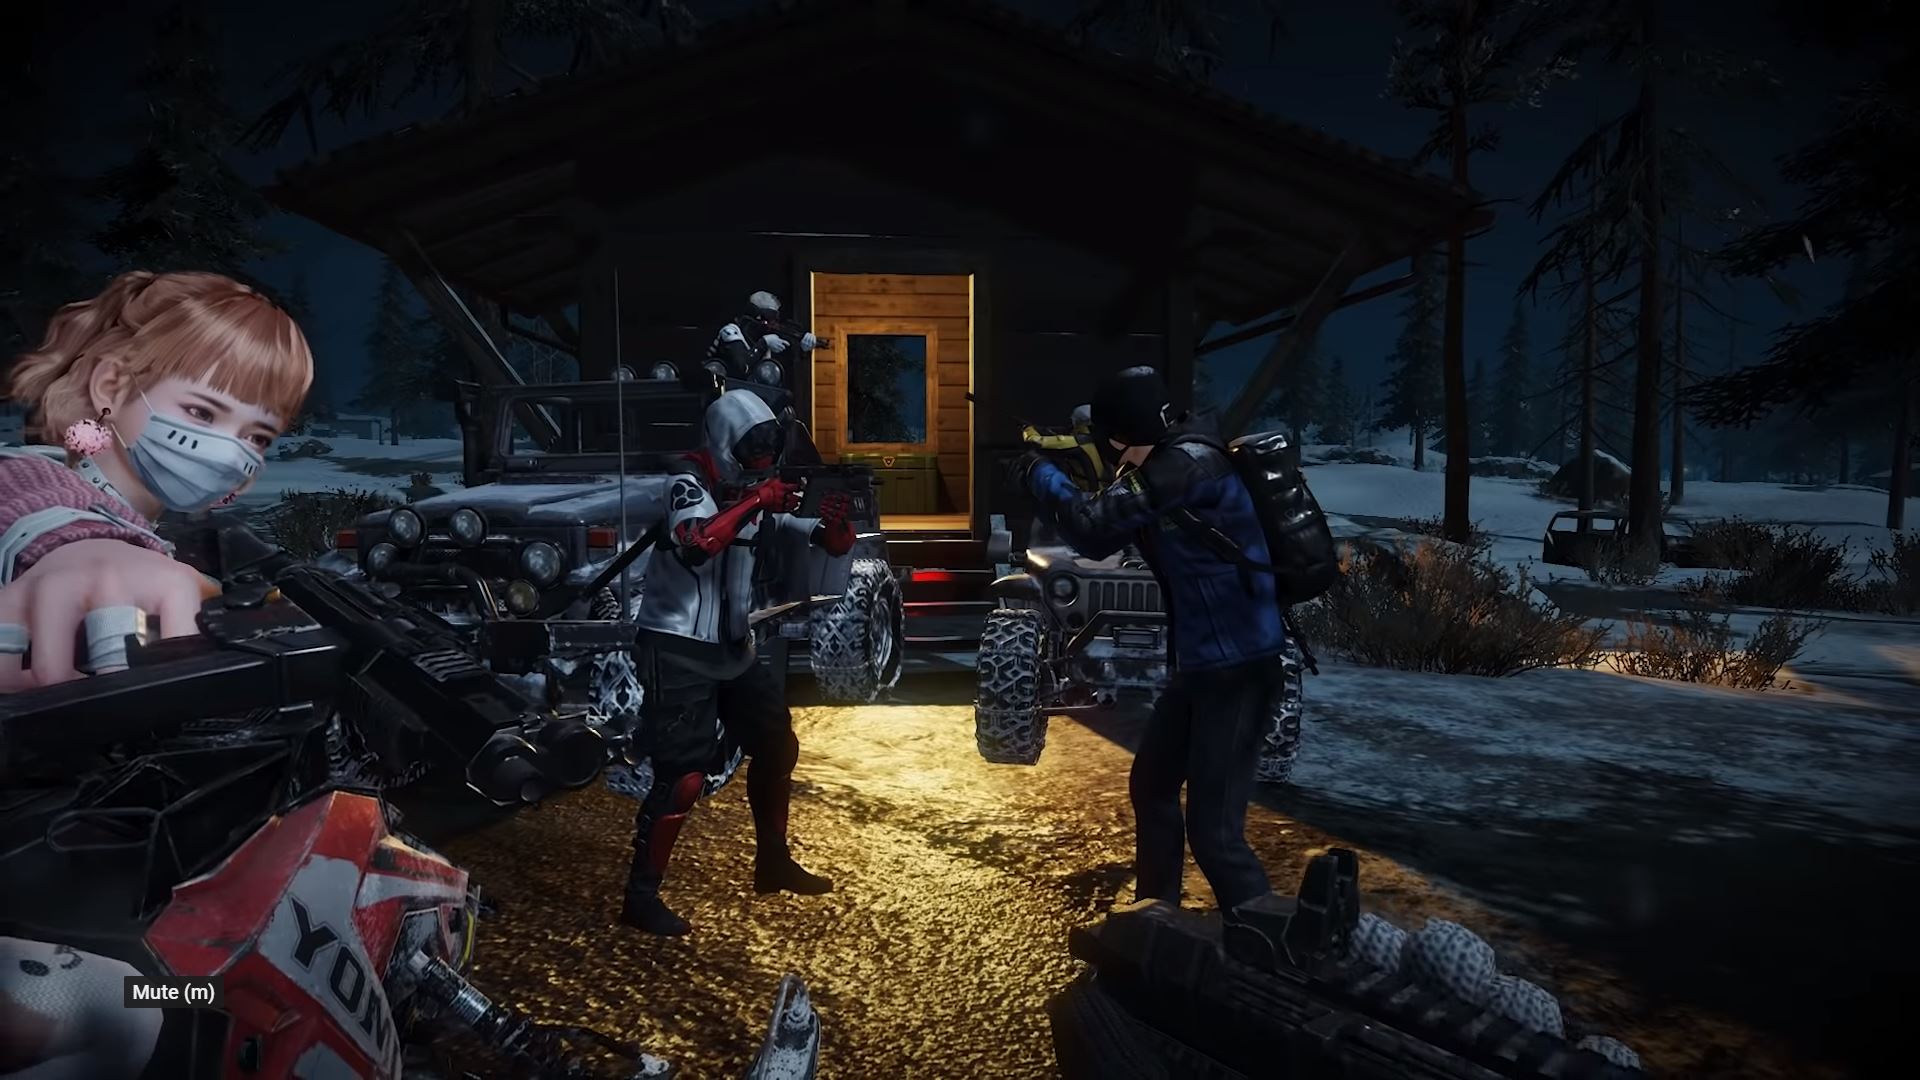 Zus Minder Van hen Ring of Elysium's new game mode arrives later today, and Tencent is sorry  for the delay | PCGamesN